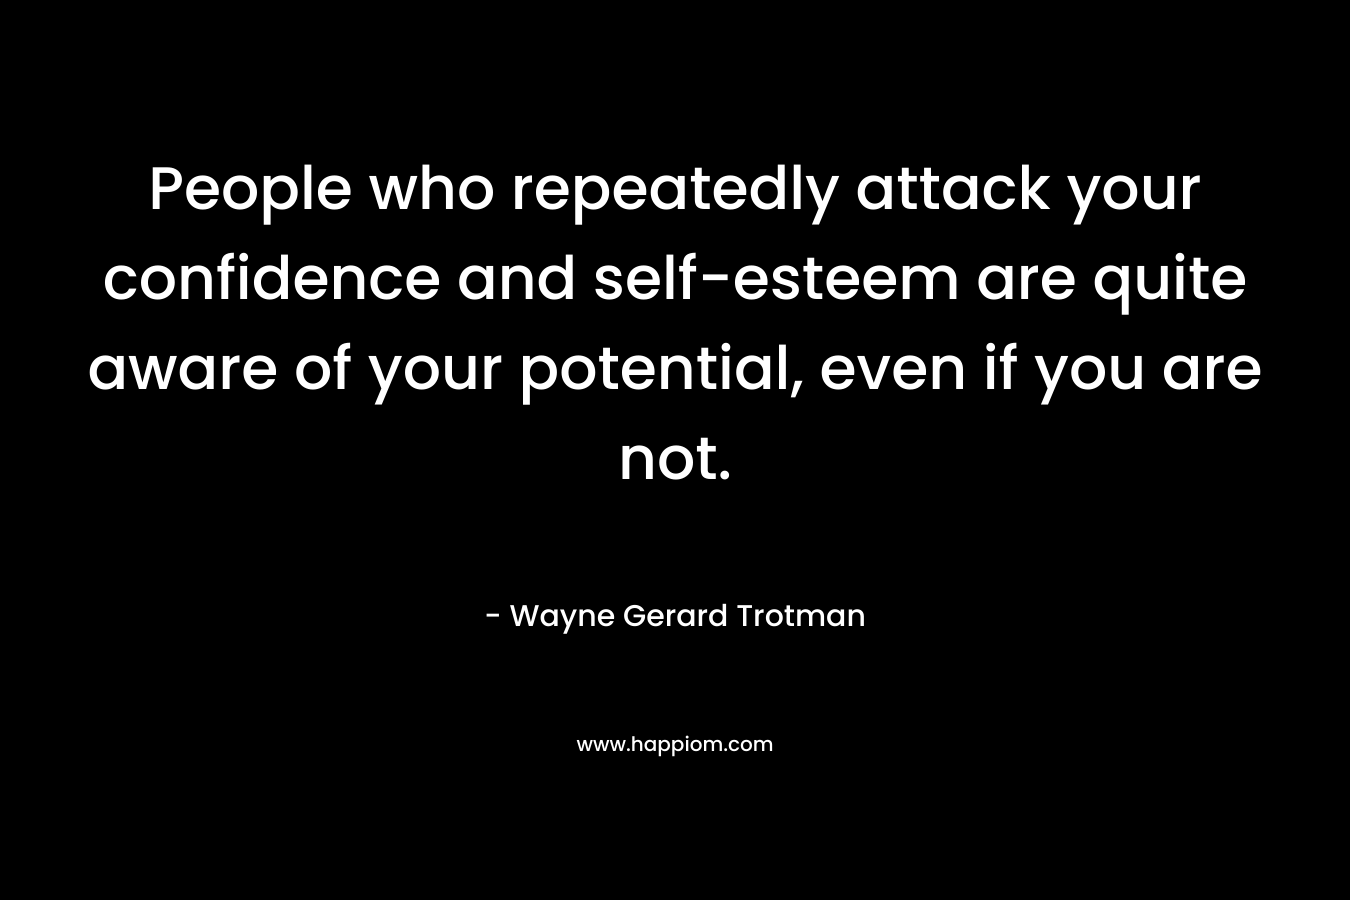 People who repeatedly attack your confidence and self-esteem are quite aware of your potential, even if you are not.